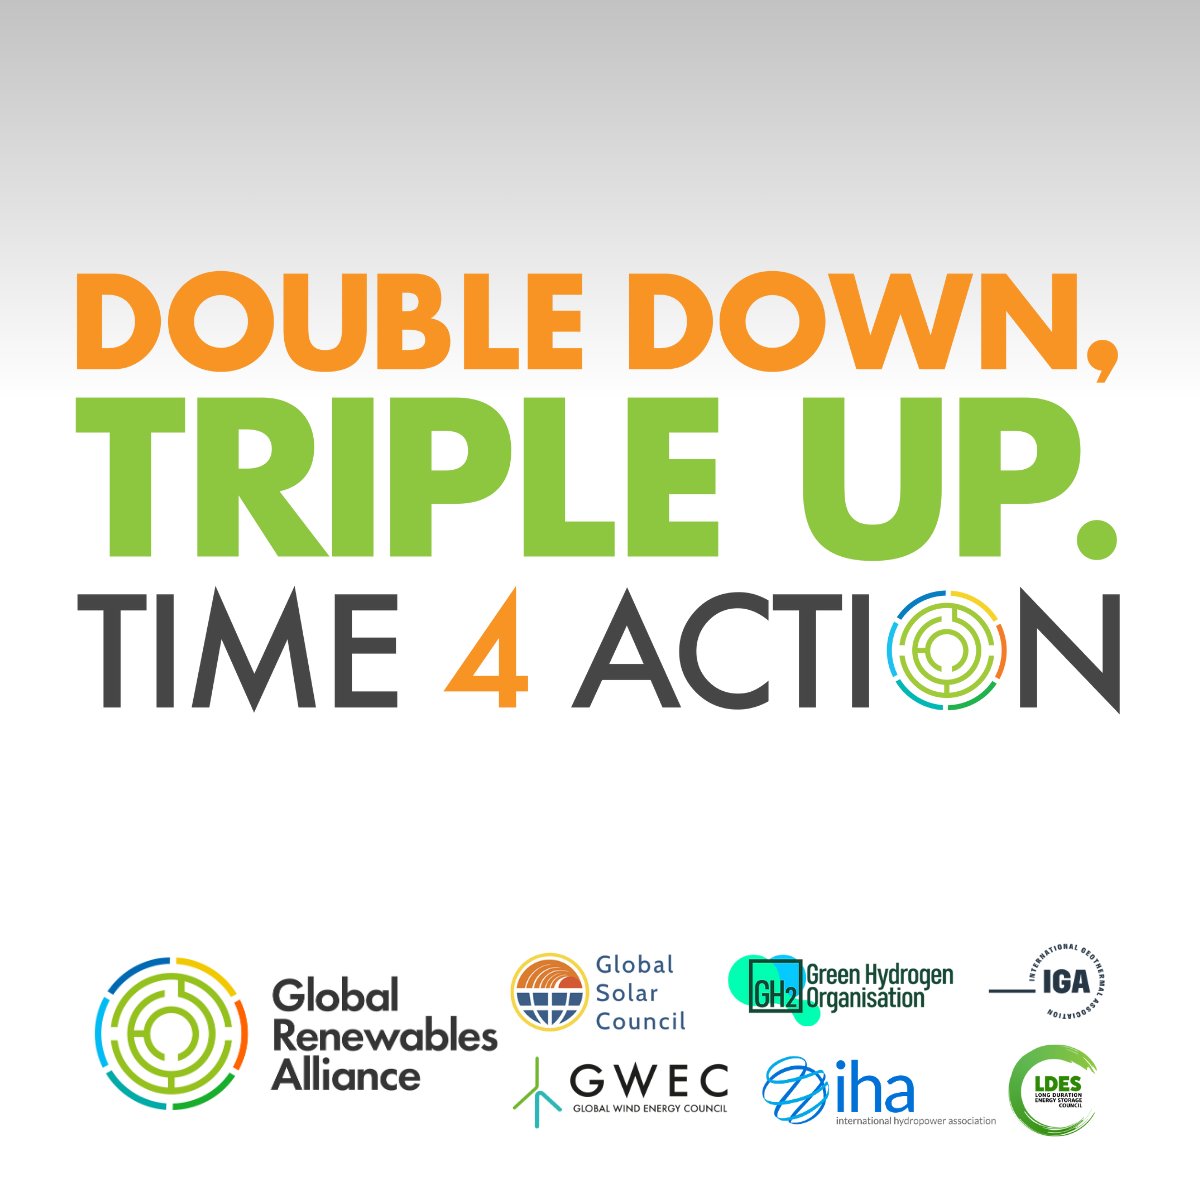 ‼️It's Time 4 Action ‼️ #COP28 set the stage as world leaders targeted Triple global renewable energy capacity & double energy efficiency by 2030 📈It’s time to realize that ambition, so with @GRA_Renewables we say: It’s #Time4Action that delivers #3xRenewables